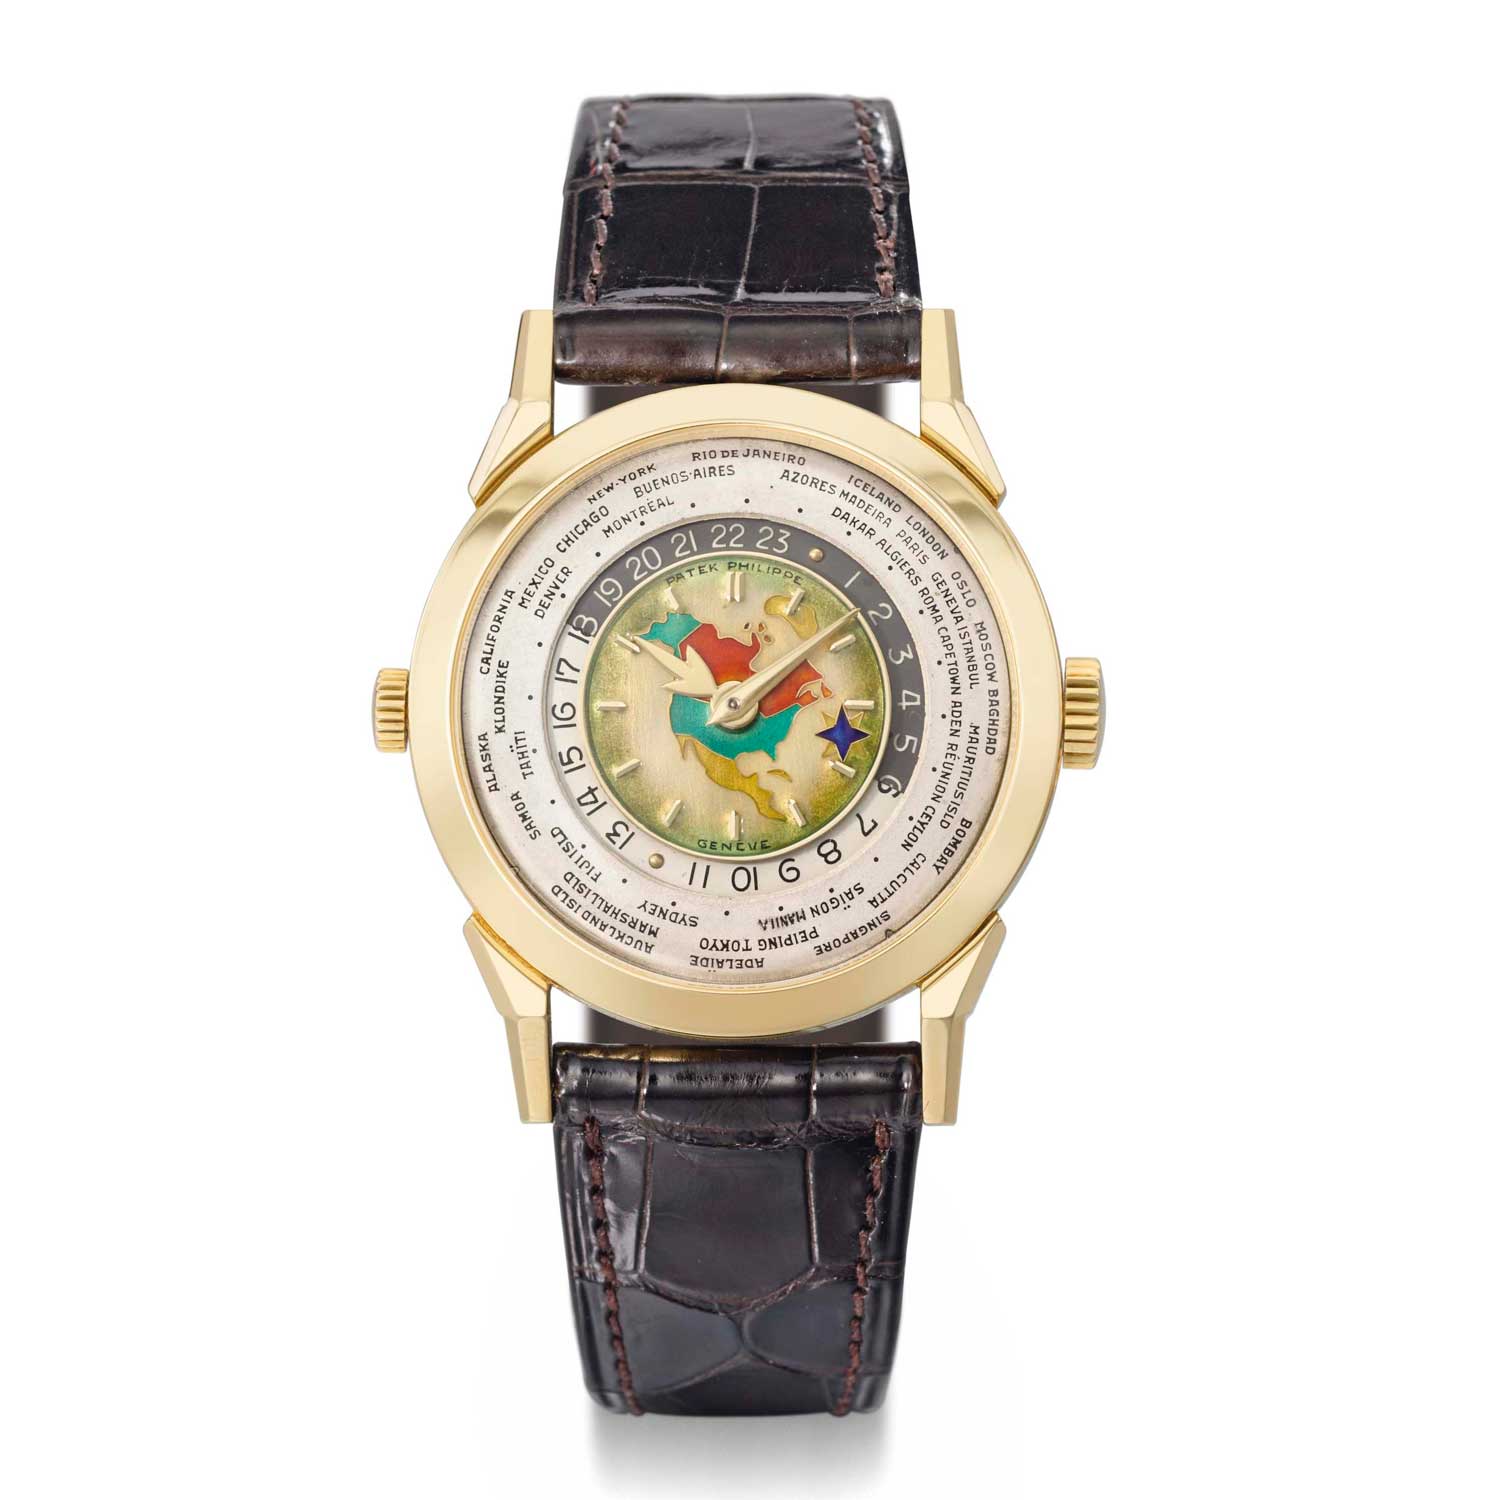 Ref. 2523 with a cloisonné enamel dial depicting the North American continent (image: Christie’s)